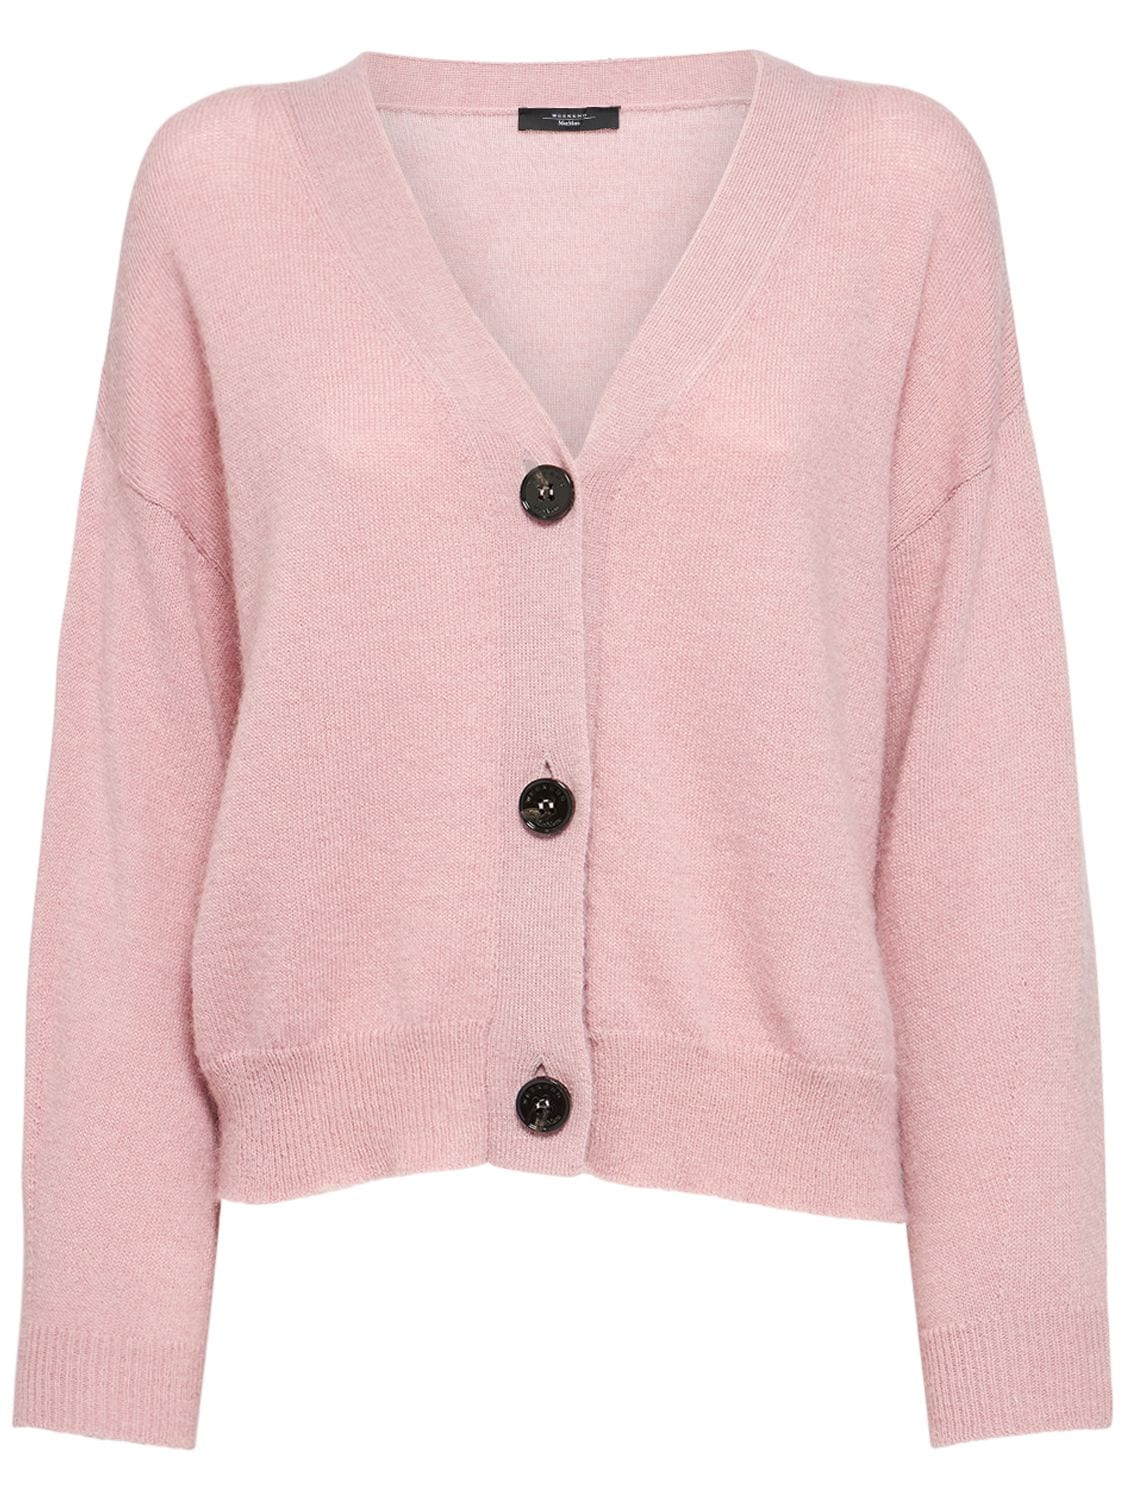 Weekend Max Mara Oblio Mohair Blend Knit Cardigan In Peonia | ModeSens